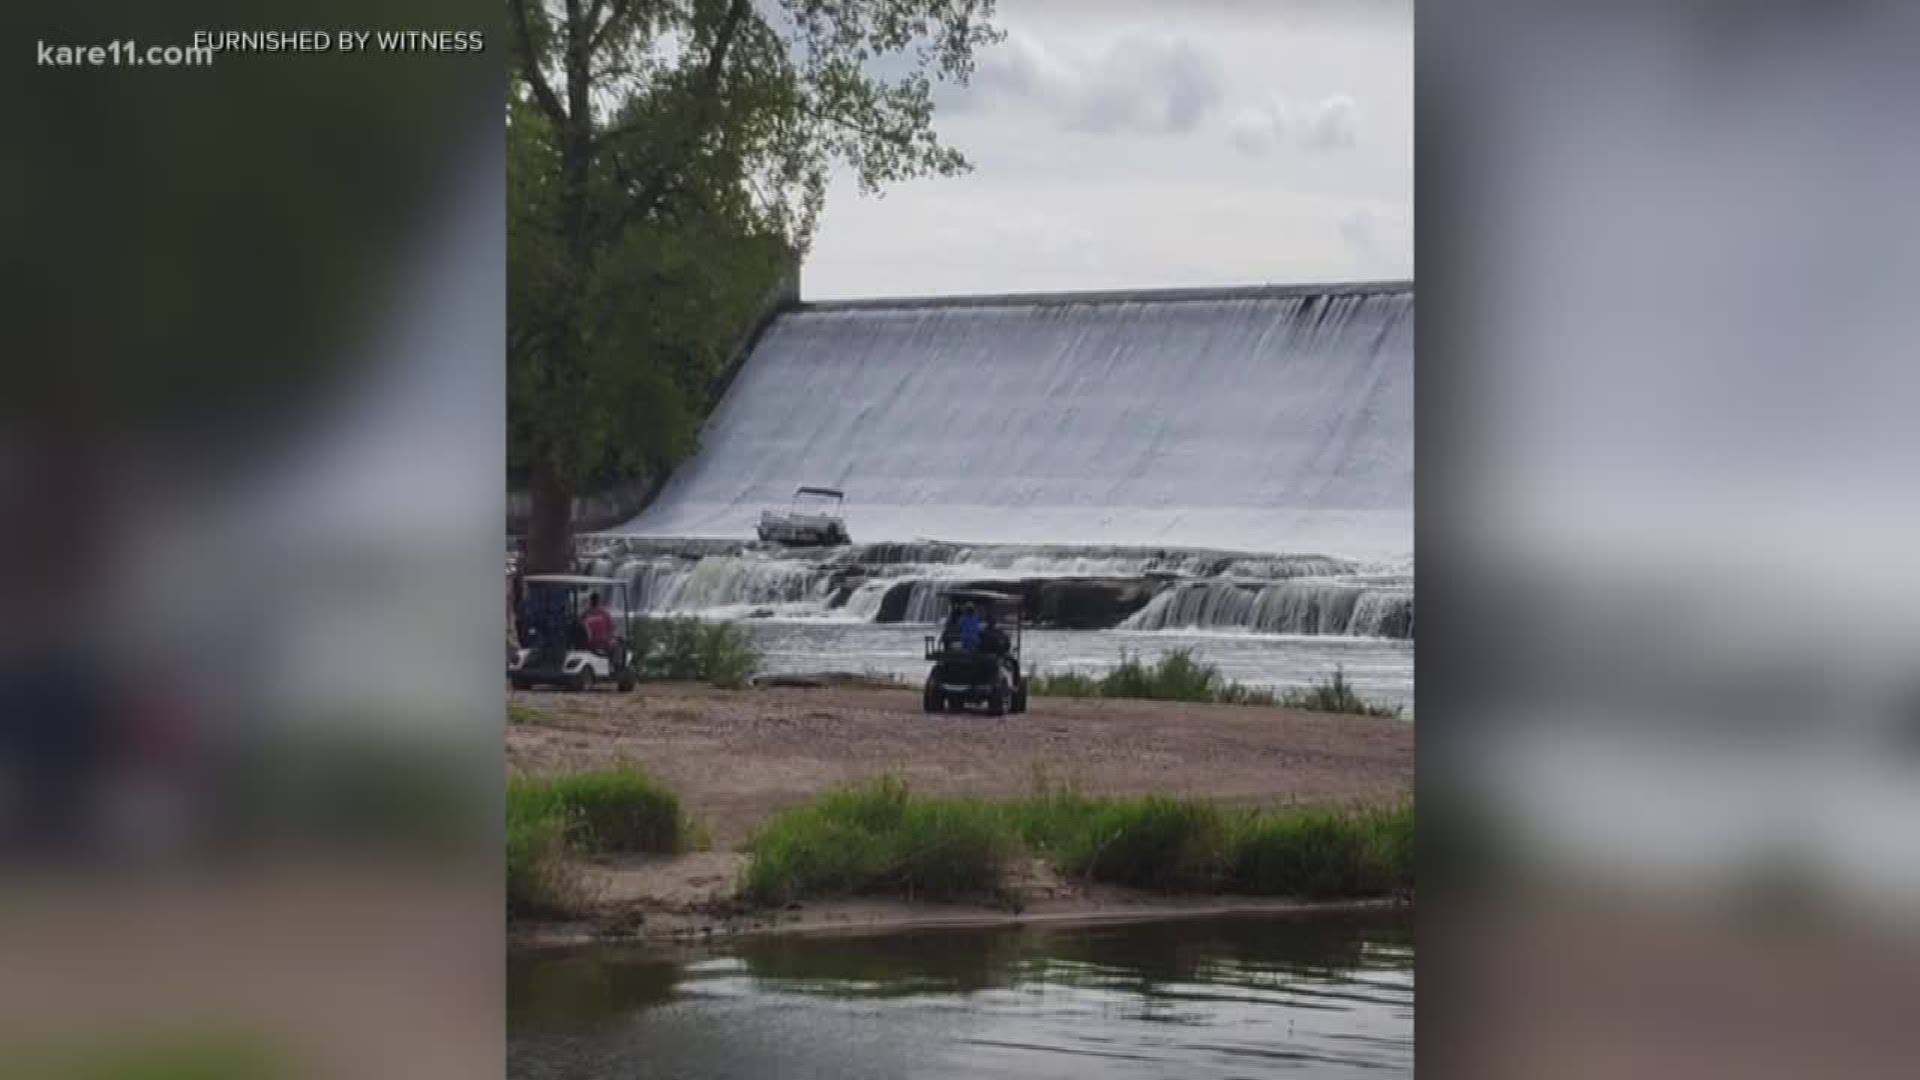 The Wabasha County Attorney’s Office is reviewing possible boating-while-intoxicated charges against an operator whose boat spilled over a power dam at Lake Zumbro with three passengers on board, according to the sheriff’s office.